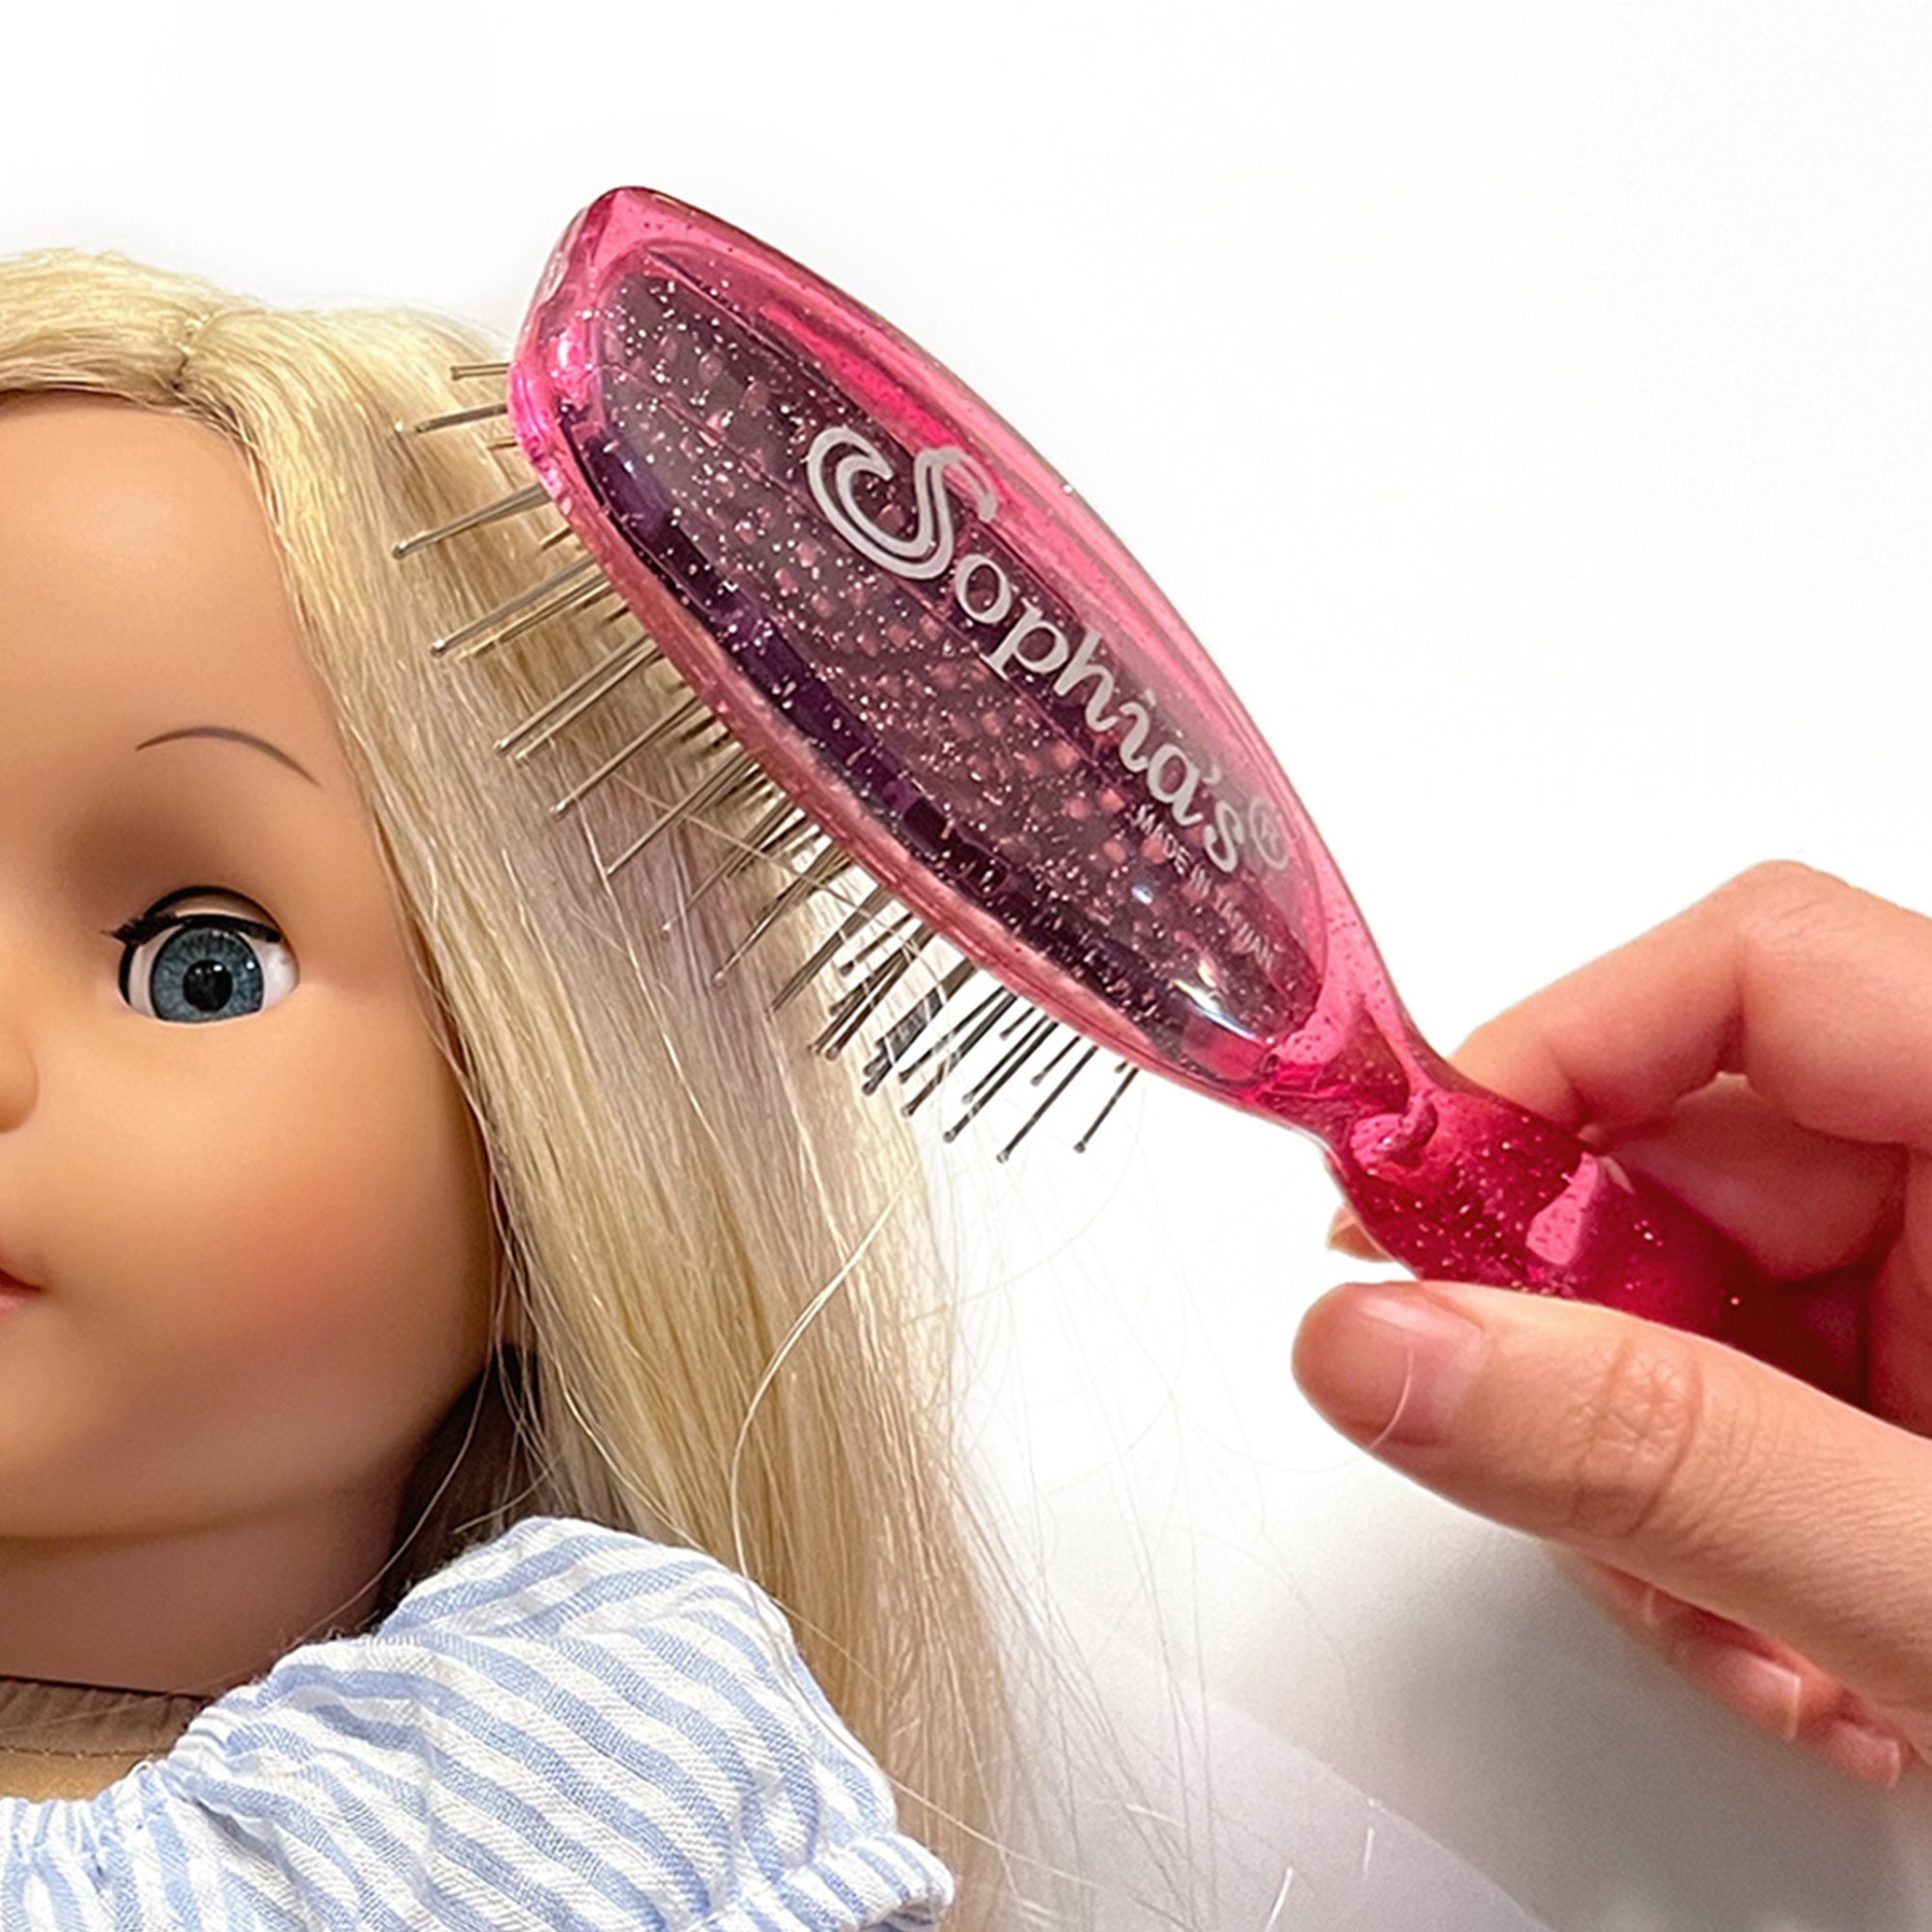 Sophia’s Wig Hairbrush Accessory with Bristles for 18" Dolls